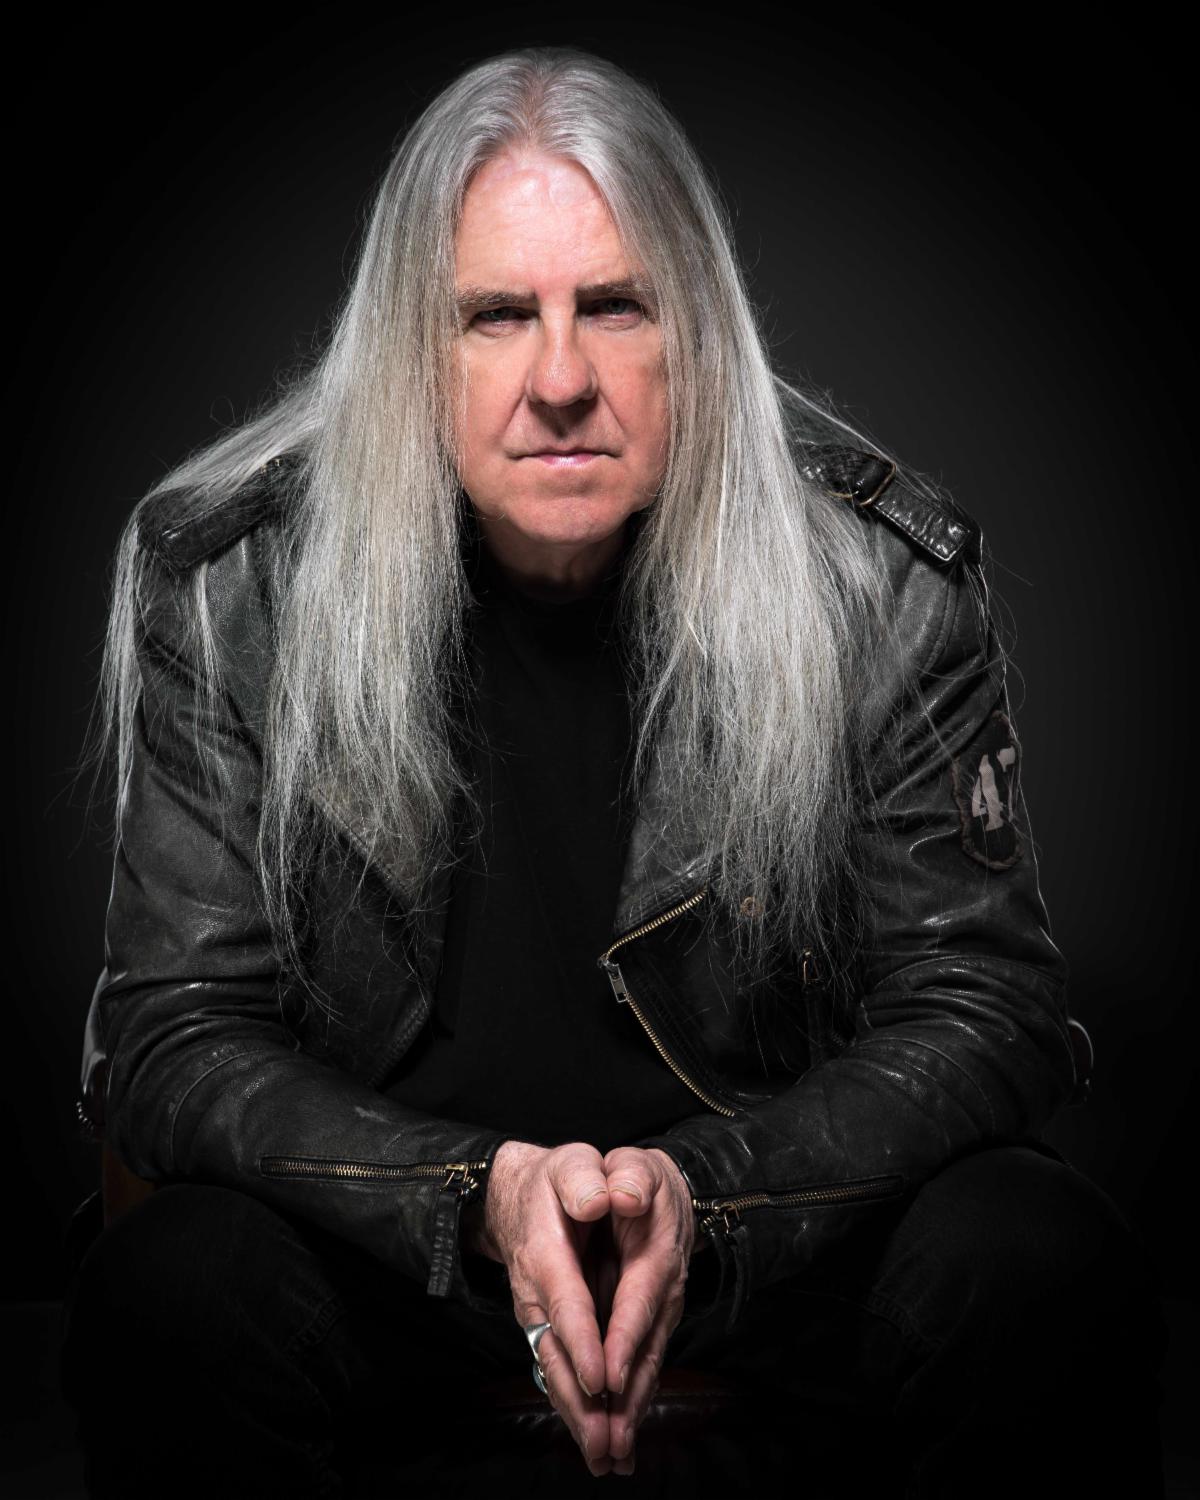 Legendary Saxon Frontman Launches Video For SCHOOL OF HARD KNOCKS